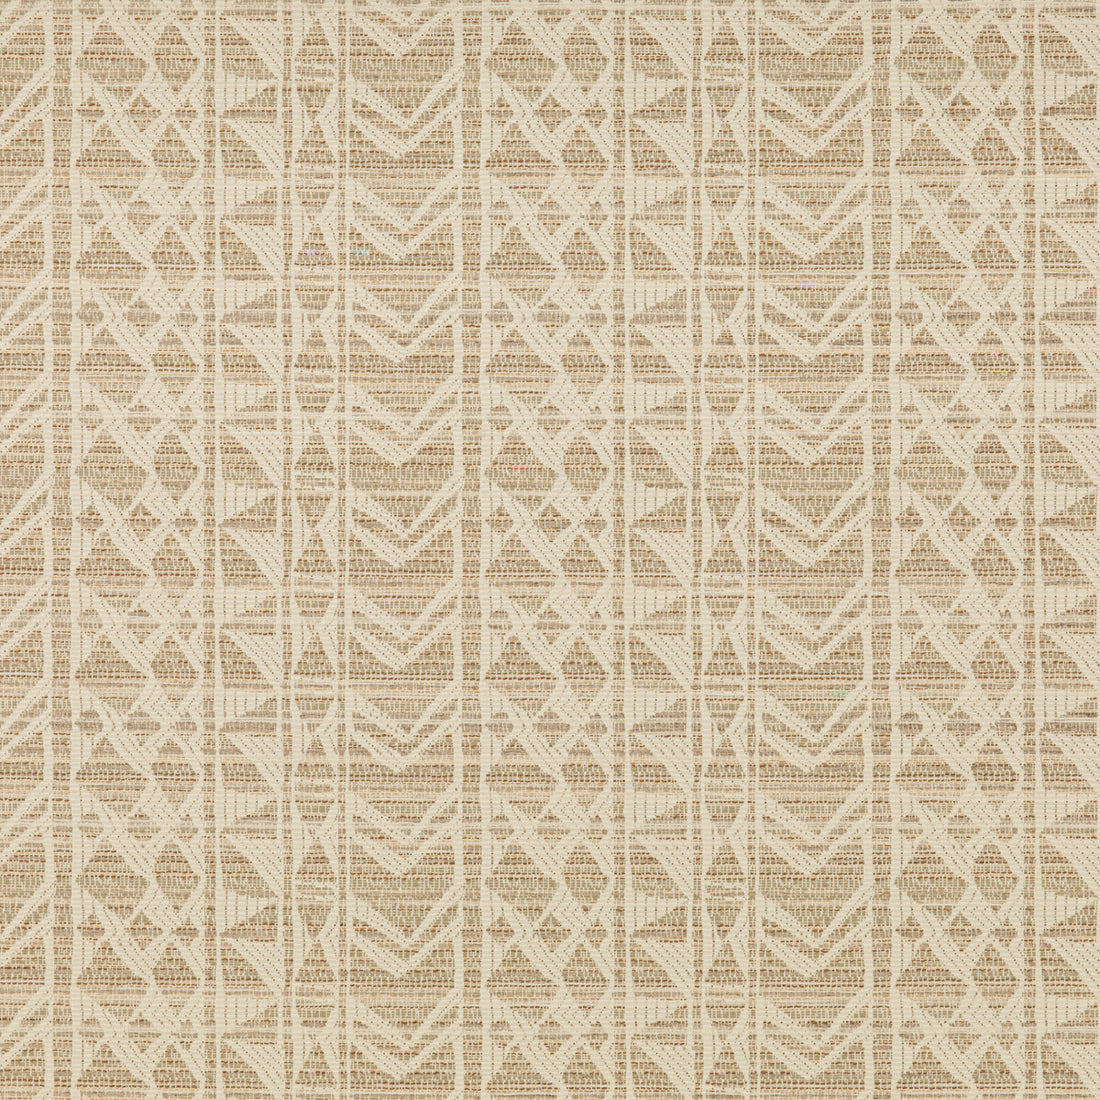 Butabu fabric in ivory color - pattern ED85318.104.0 - by Threads in the Luxury Weaves II collection